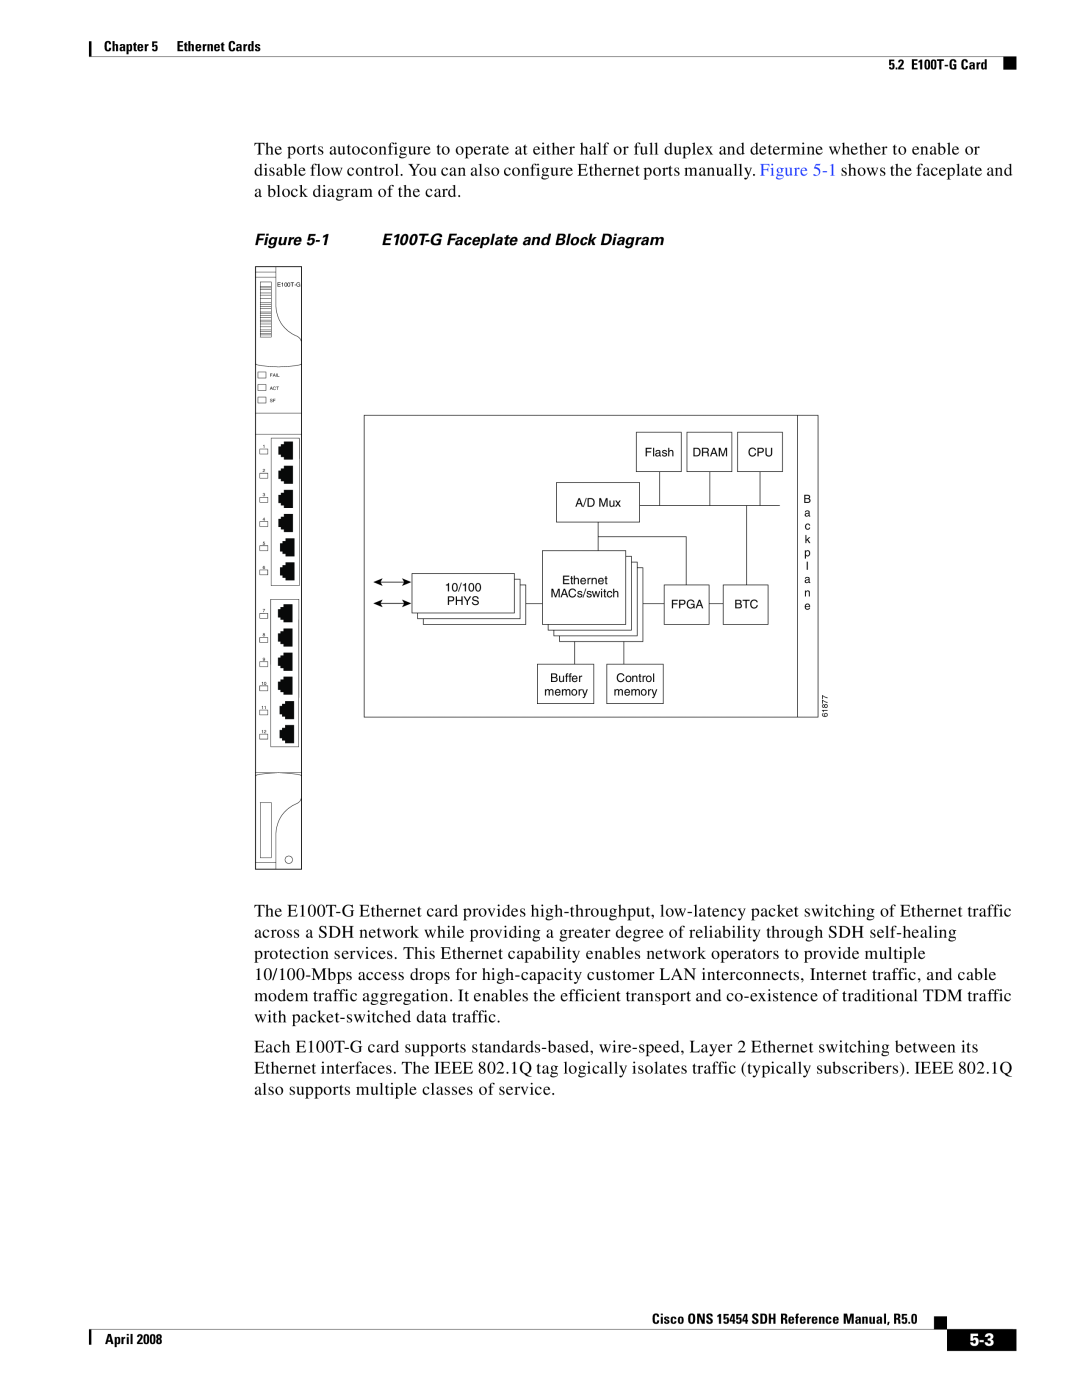 Cisco Systems ONS 15454 SDH specifications 1 E100T-GFaceplate and Block Diagram, Ethernet Cards 5.2 E100T-GCard, April 